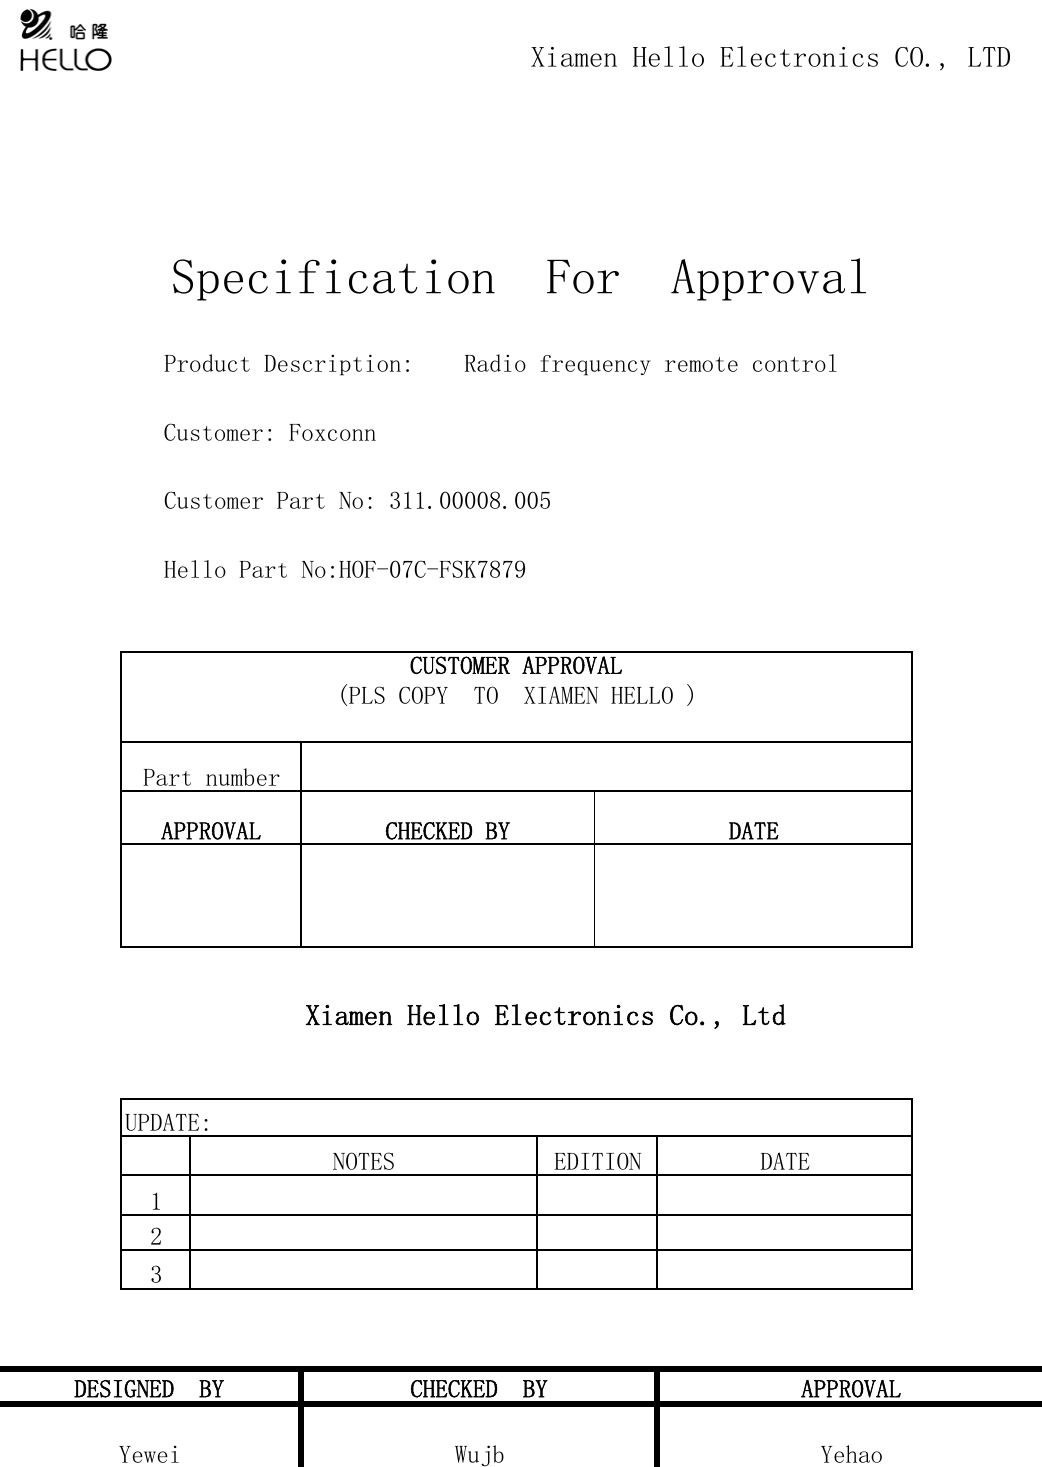 Xiamen Hello Electronics Co., Ltd123Yewei Wujb YehaoDESIGNED  BY CHECKED  BY APPROVALUPDATE:NOTES EDITION DATEAPPROVAL CHECKED BY DATE             Customer Part No: 311.00008.005             Hello Part No:HOF-07C-FSK7879CUSTOMER APPROVAL(PLS COPY  TO  XIAMEN HELLO )Part number                                        Xiamen Hello Electronics CO., LTDSpecification  For  Approval             Product Description:    Radio frequency remote control             Customer: Foxconn